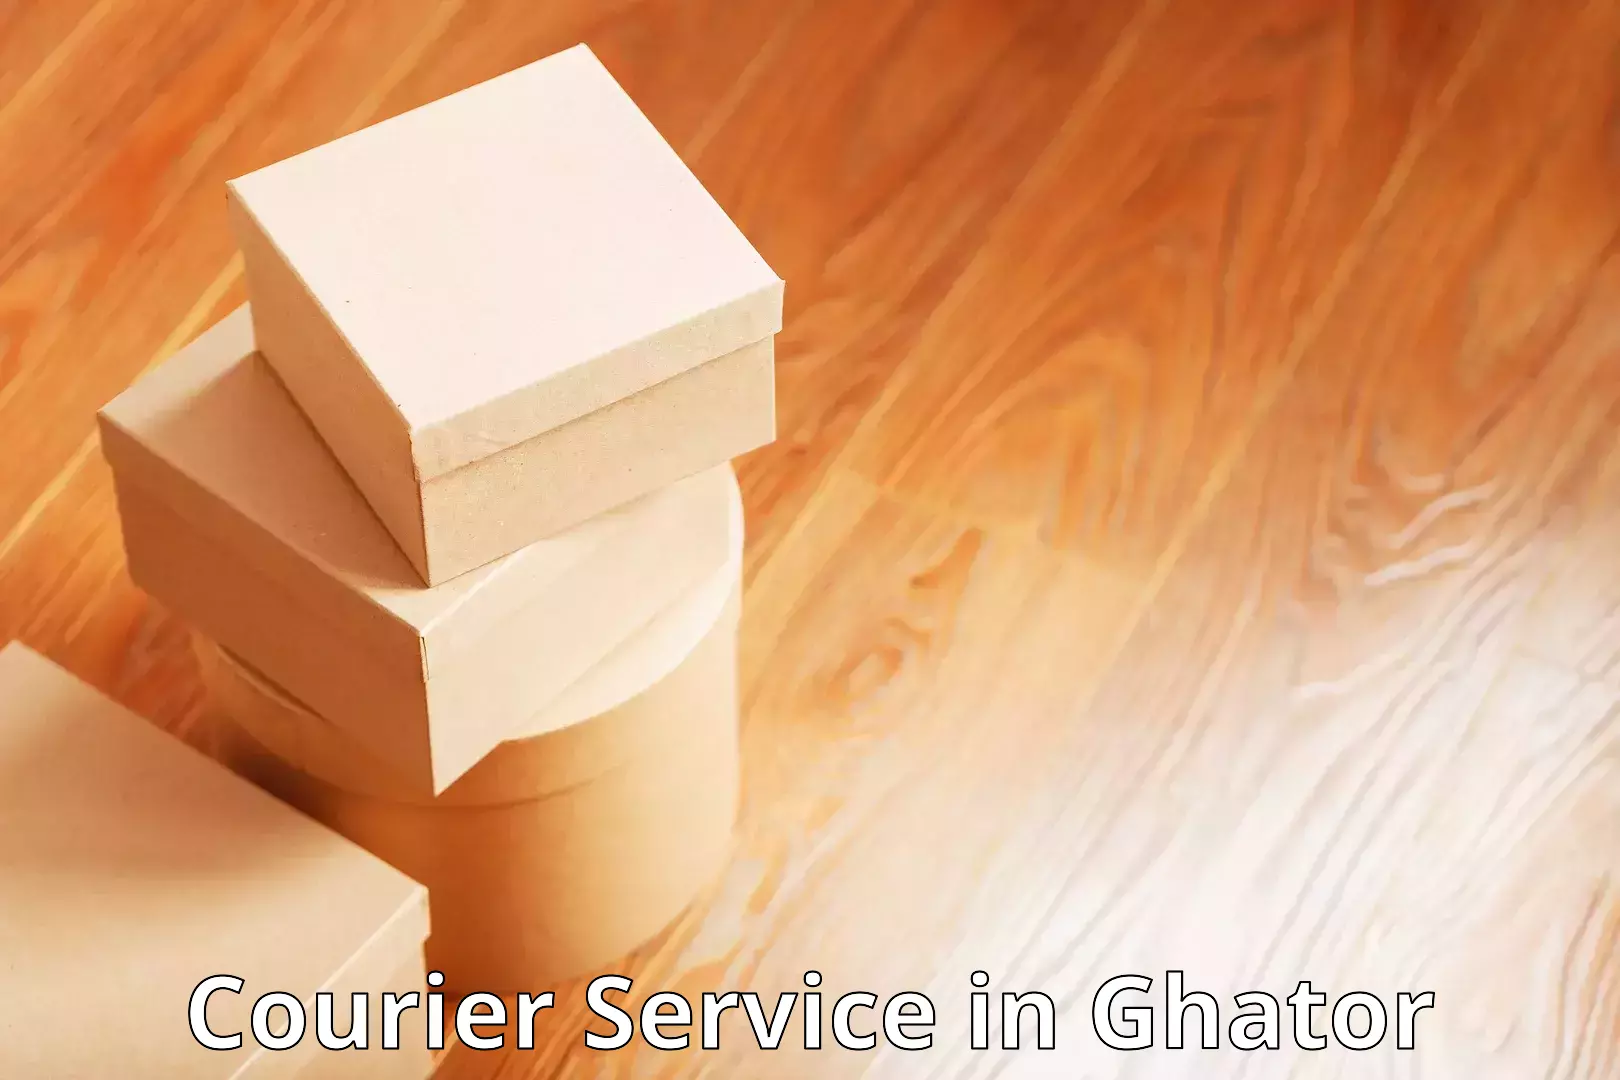 Fastest parcel delivery in Ghator